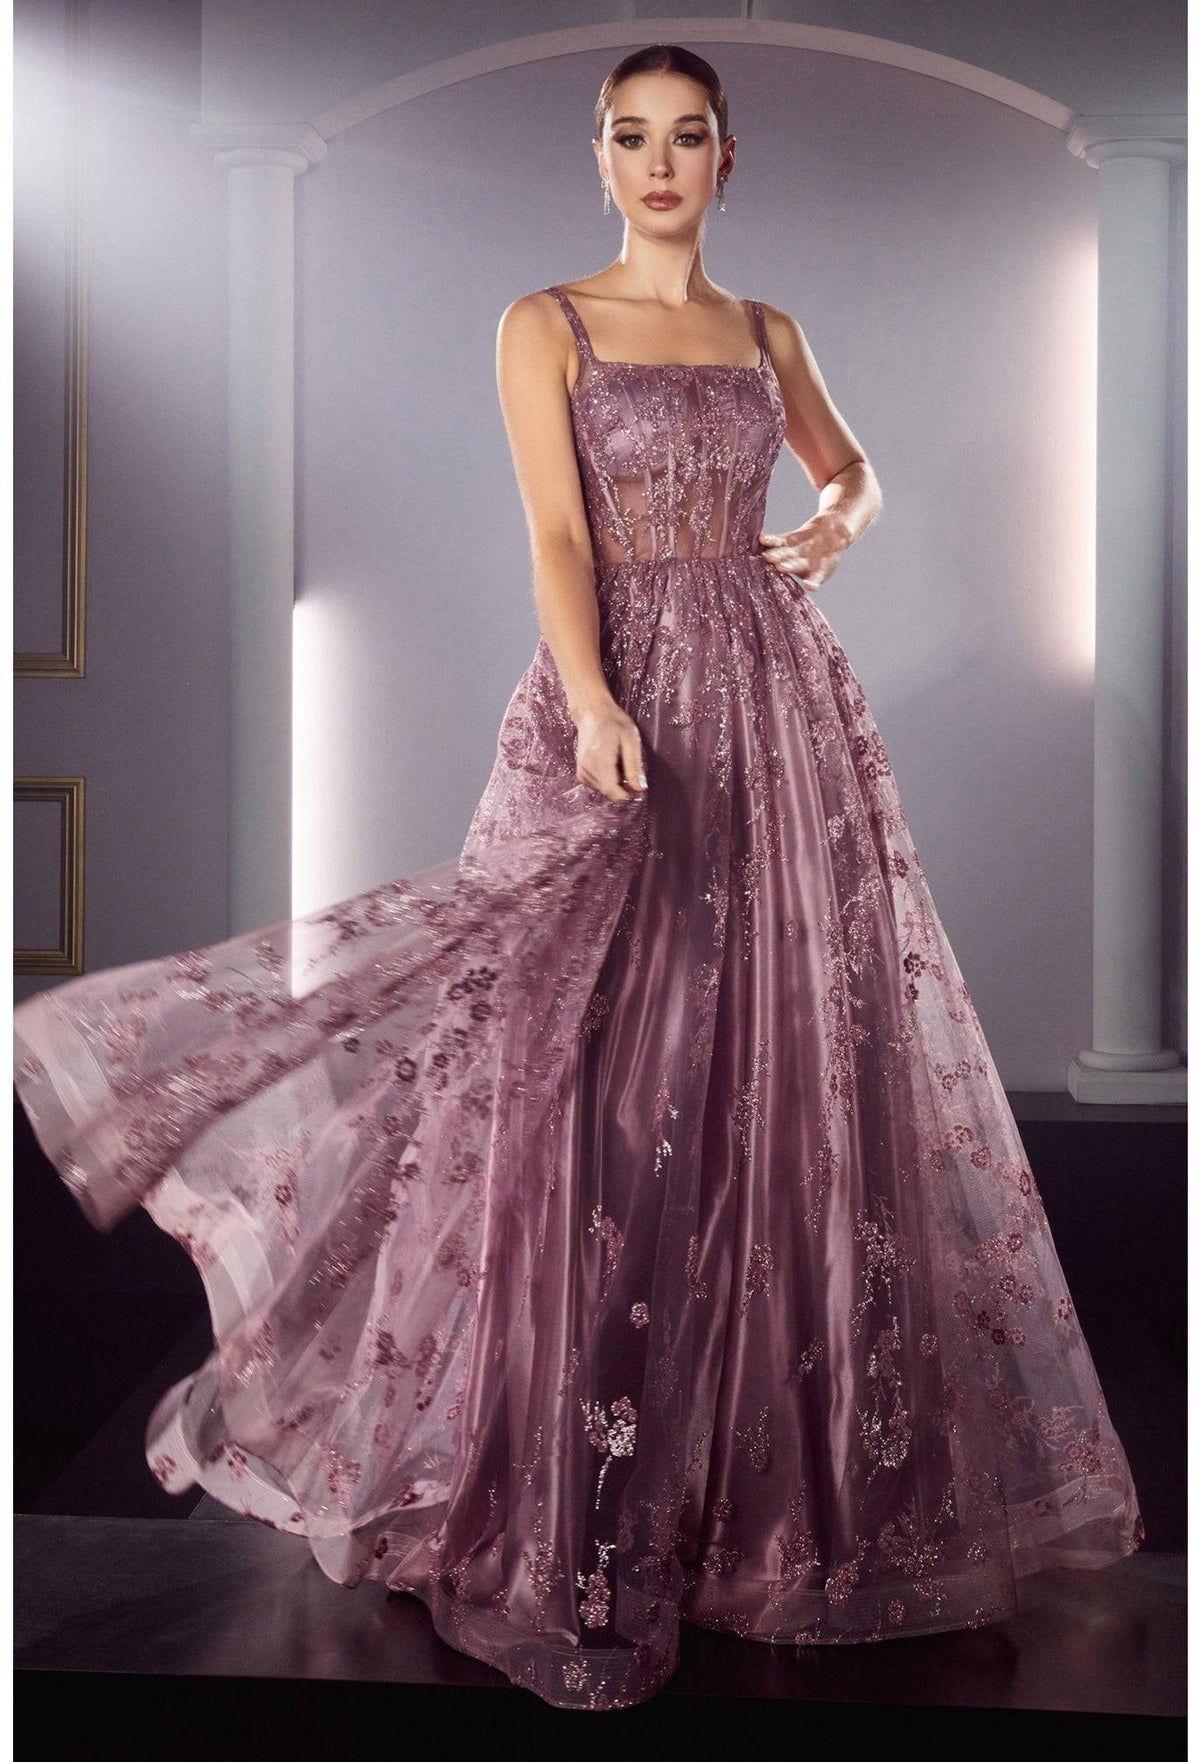 Cinderella Divine J840 Stunning Floral Gown - NORMA REED